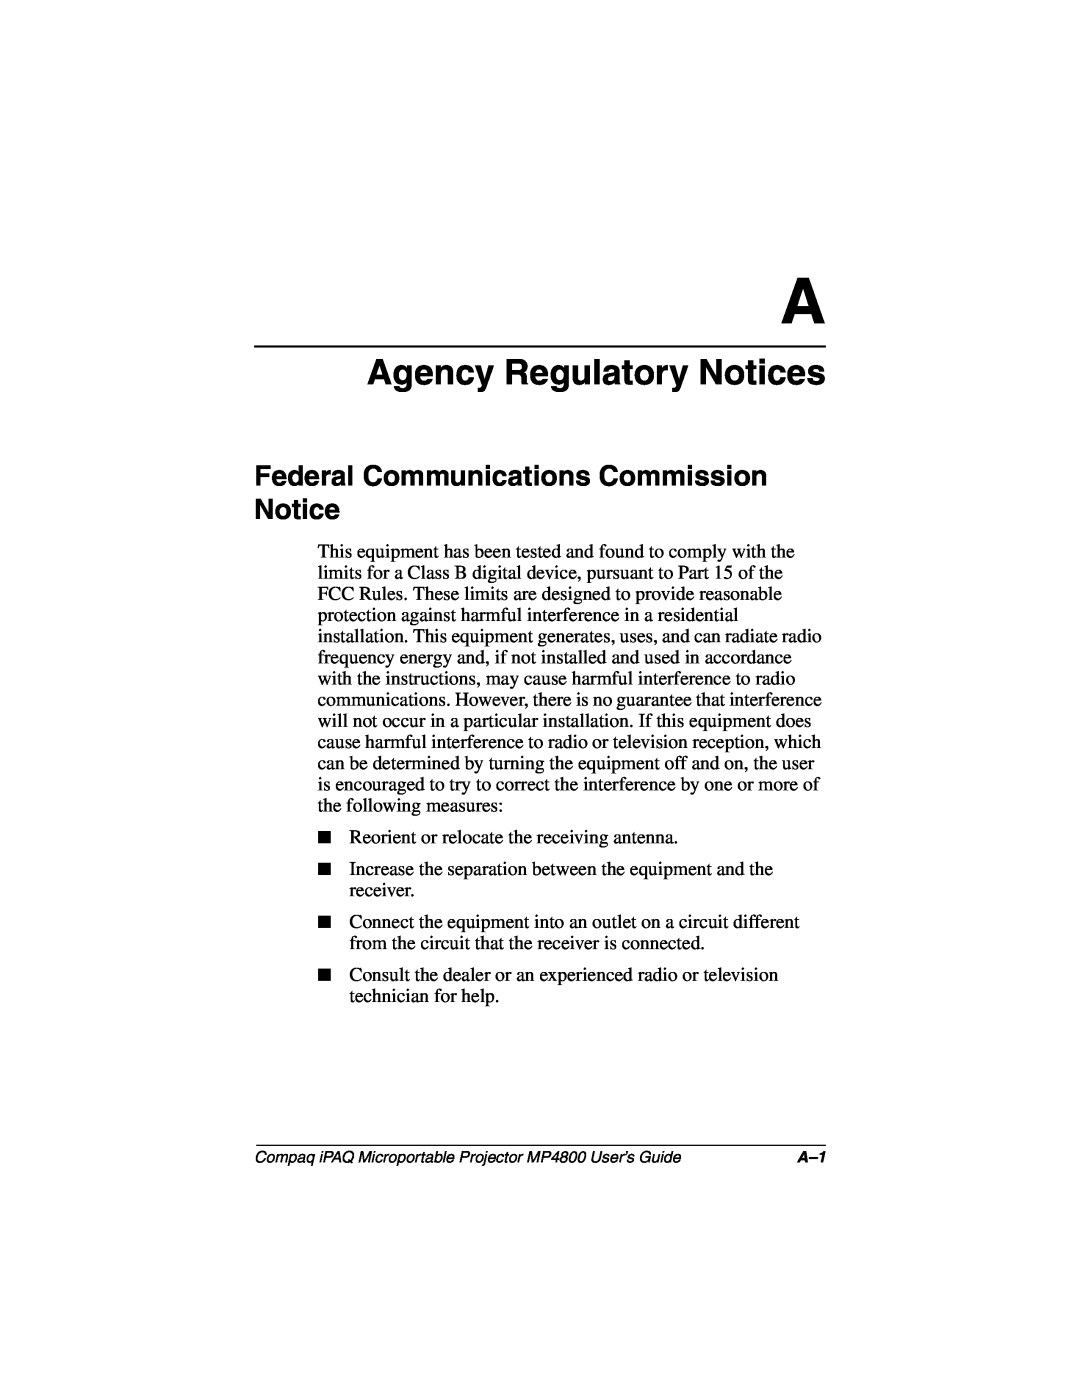 Compaq MP4800 manual Agency Regulatory Notices, Federal Communications Commission Notice 